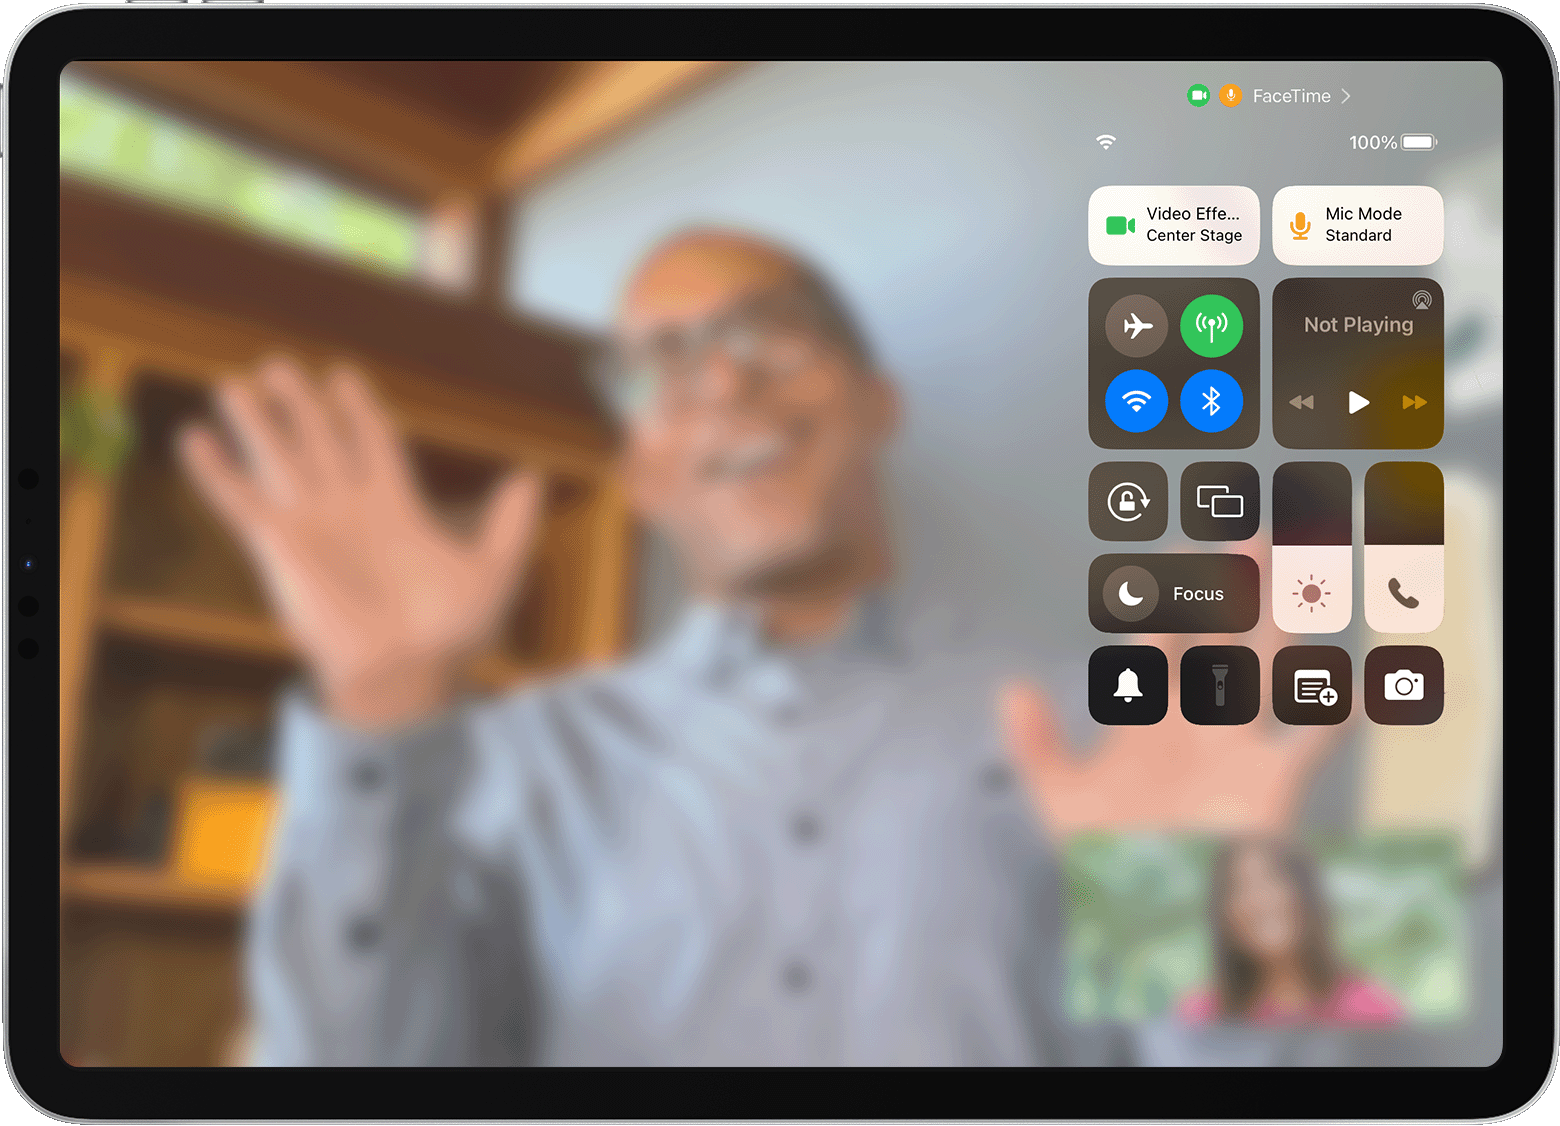 iPad screen showing a FaceTime call with Control Centre visible, including the Video Effects button